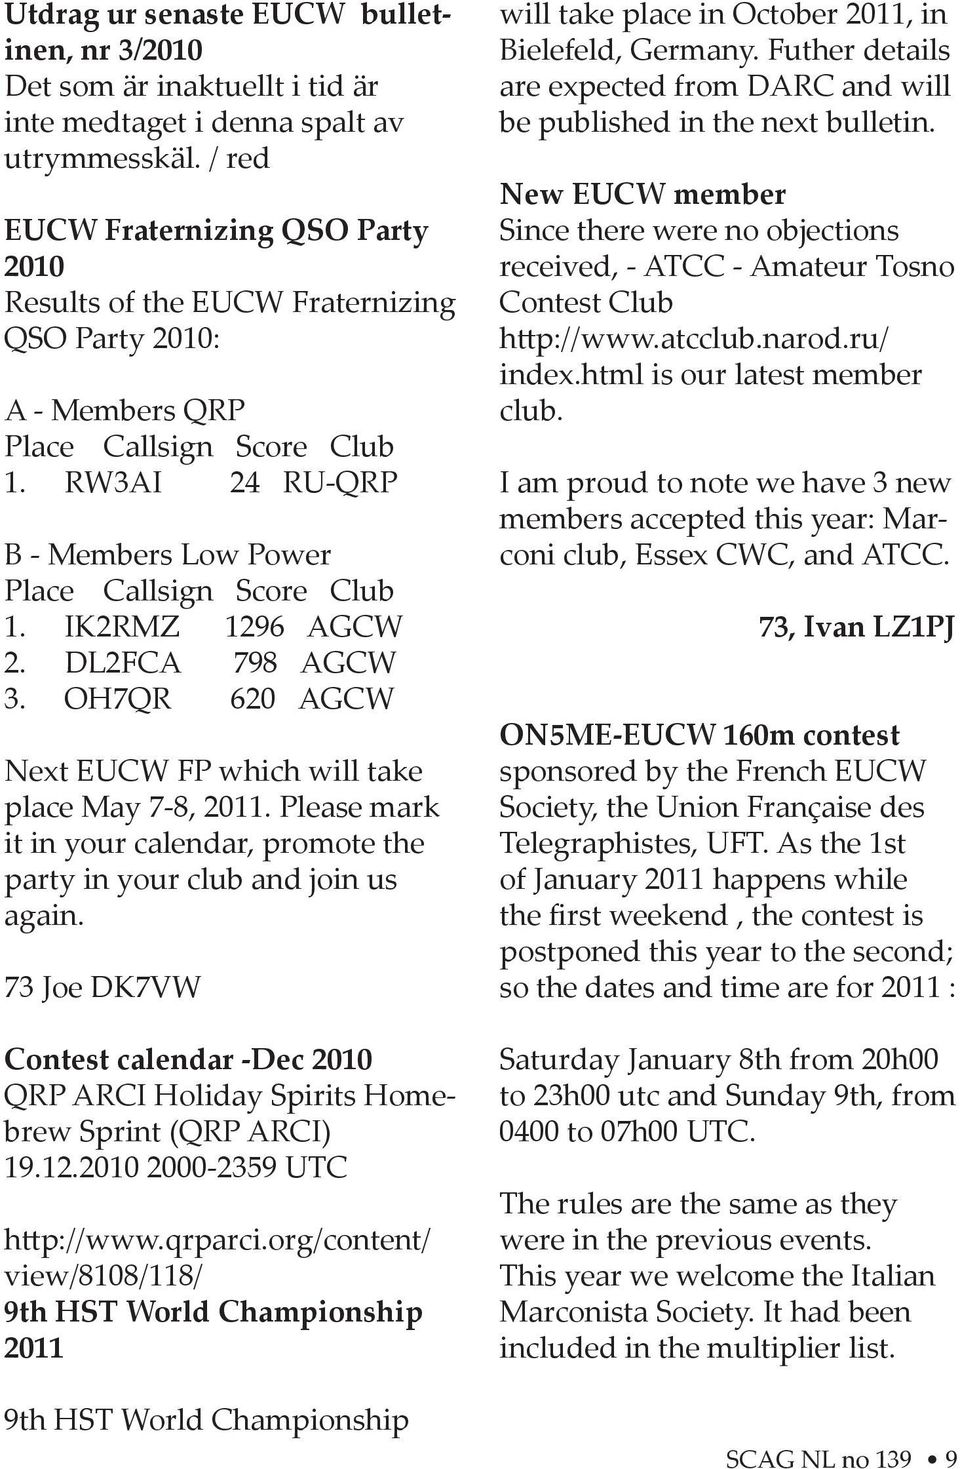 IK2RMZ 1296 AGCW 2. DL2FCA 798 AGCW 3. OH7QR 620 AGCW Next EUCW FP which will take place May 7-8, 2011. Please mark it in your calendar, promote the party in your club and join us again.